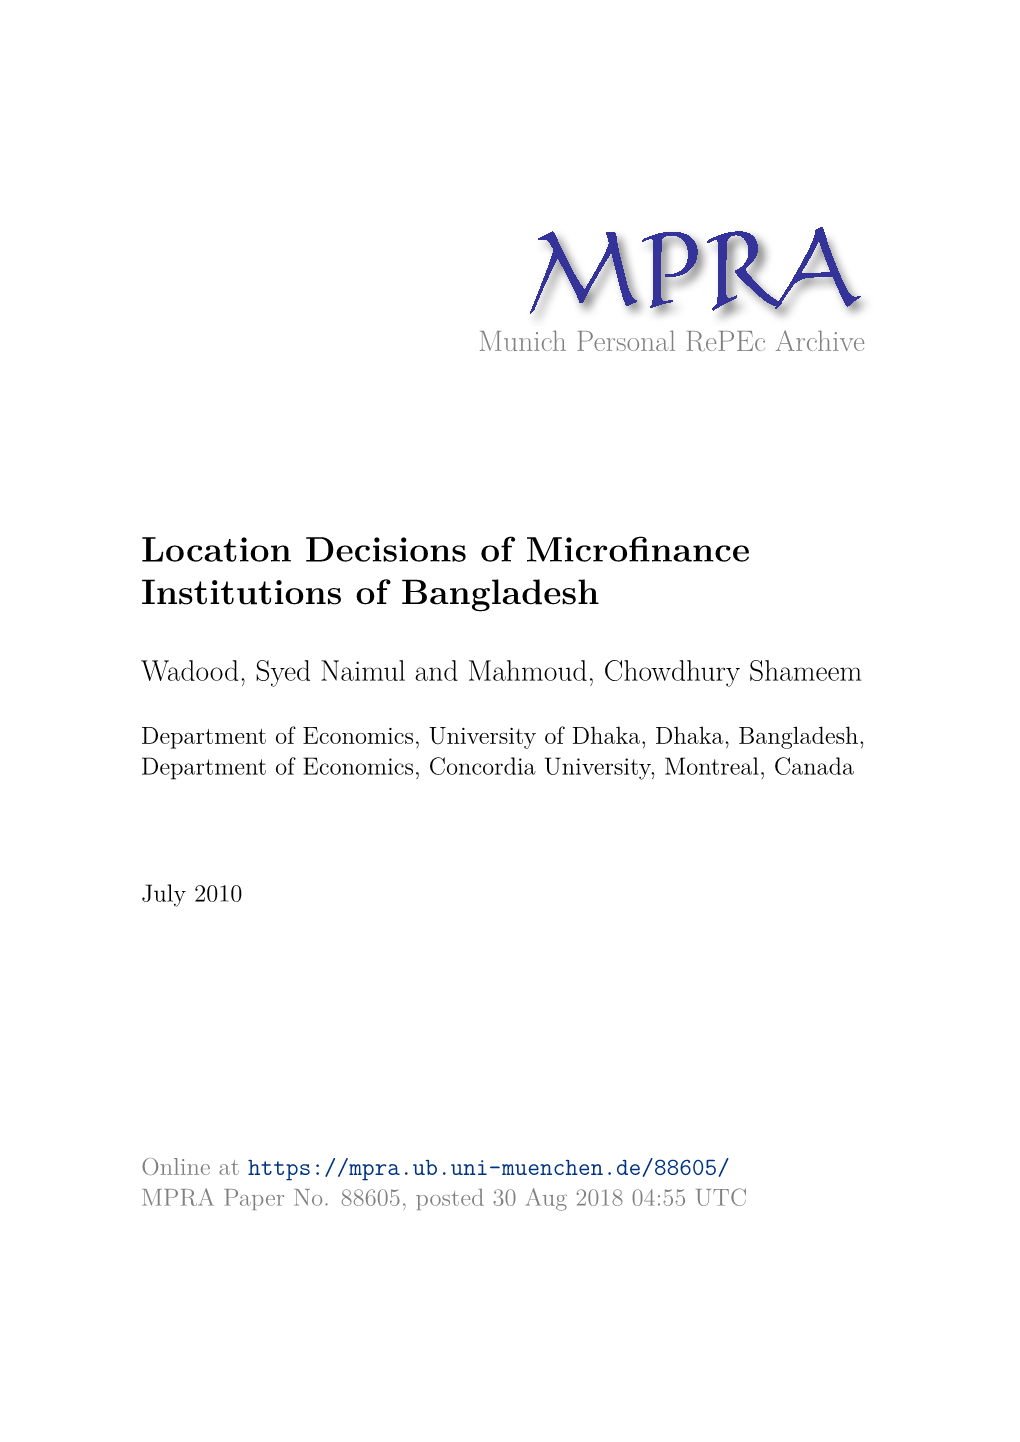 LOCATION DECISIONS of MICROFINANCE INSTITUTIONS of BANGLADESH Syed Naimul Wadood1and Chowdhury Shameem Mahmoud2